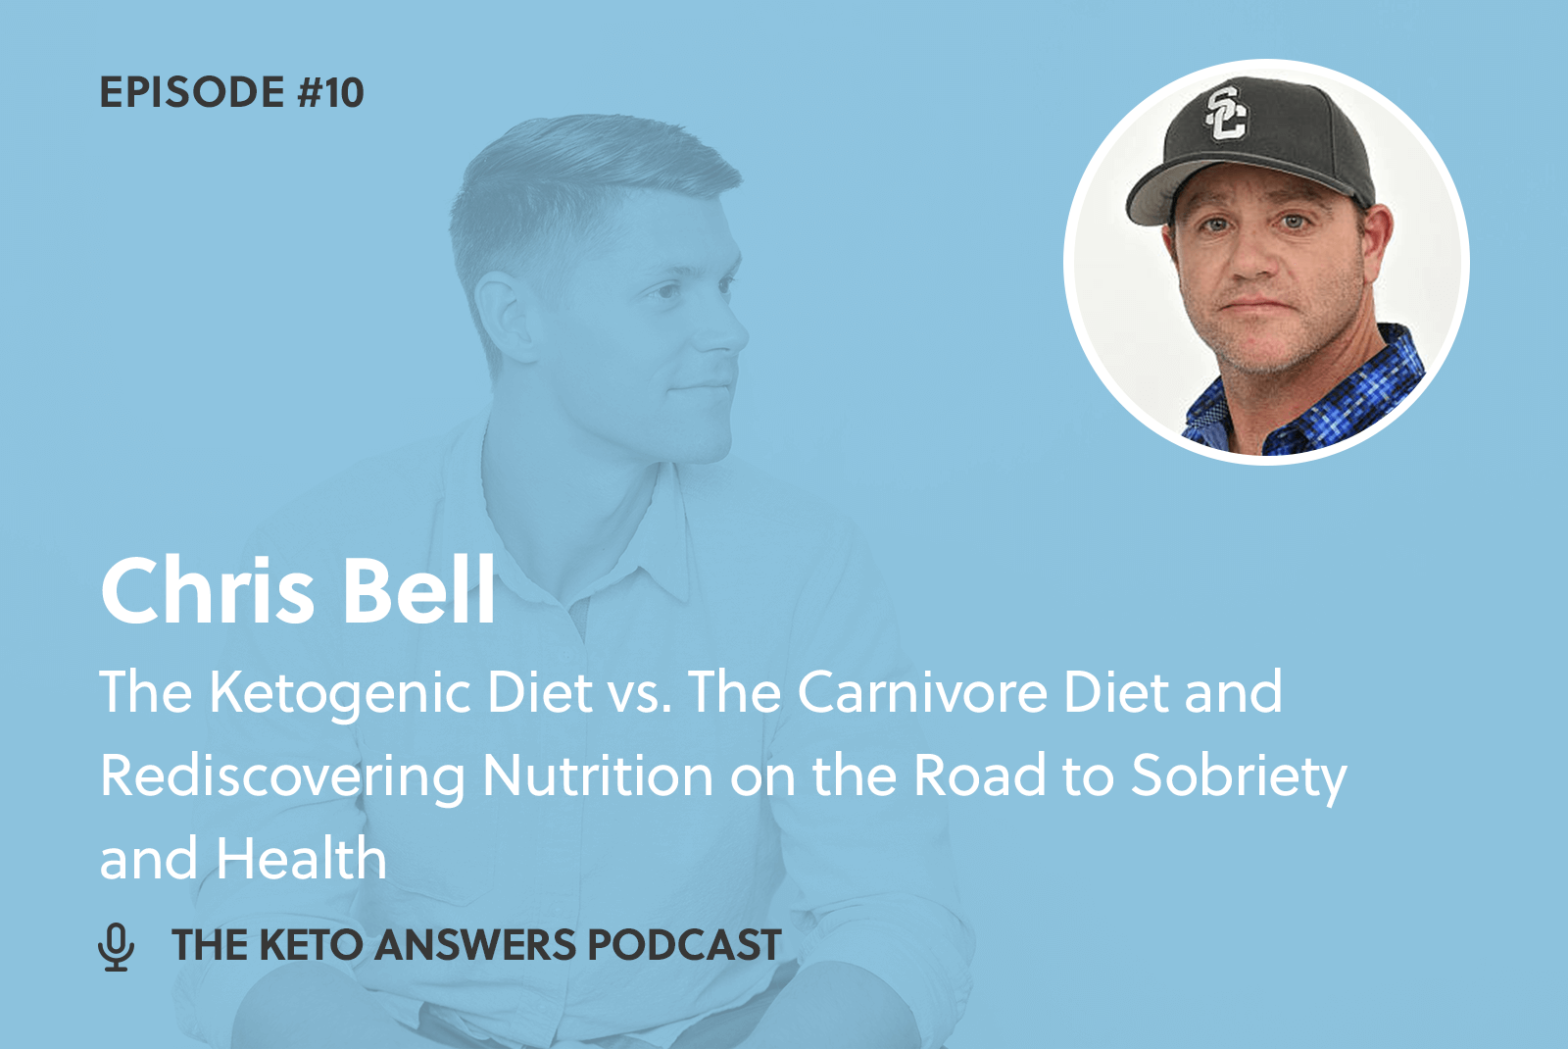 010: The Ketogenic Diet vs. the Carnivore Diet and Rediscovering Nutrition on the Road to Sobriety and Health - Chris Bell